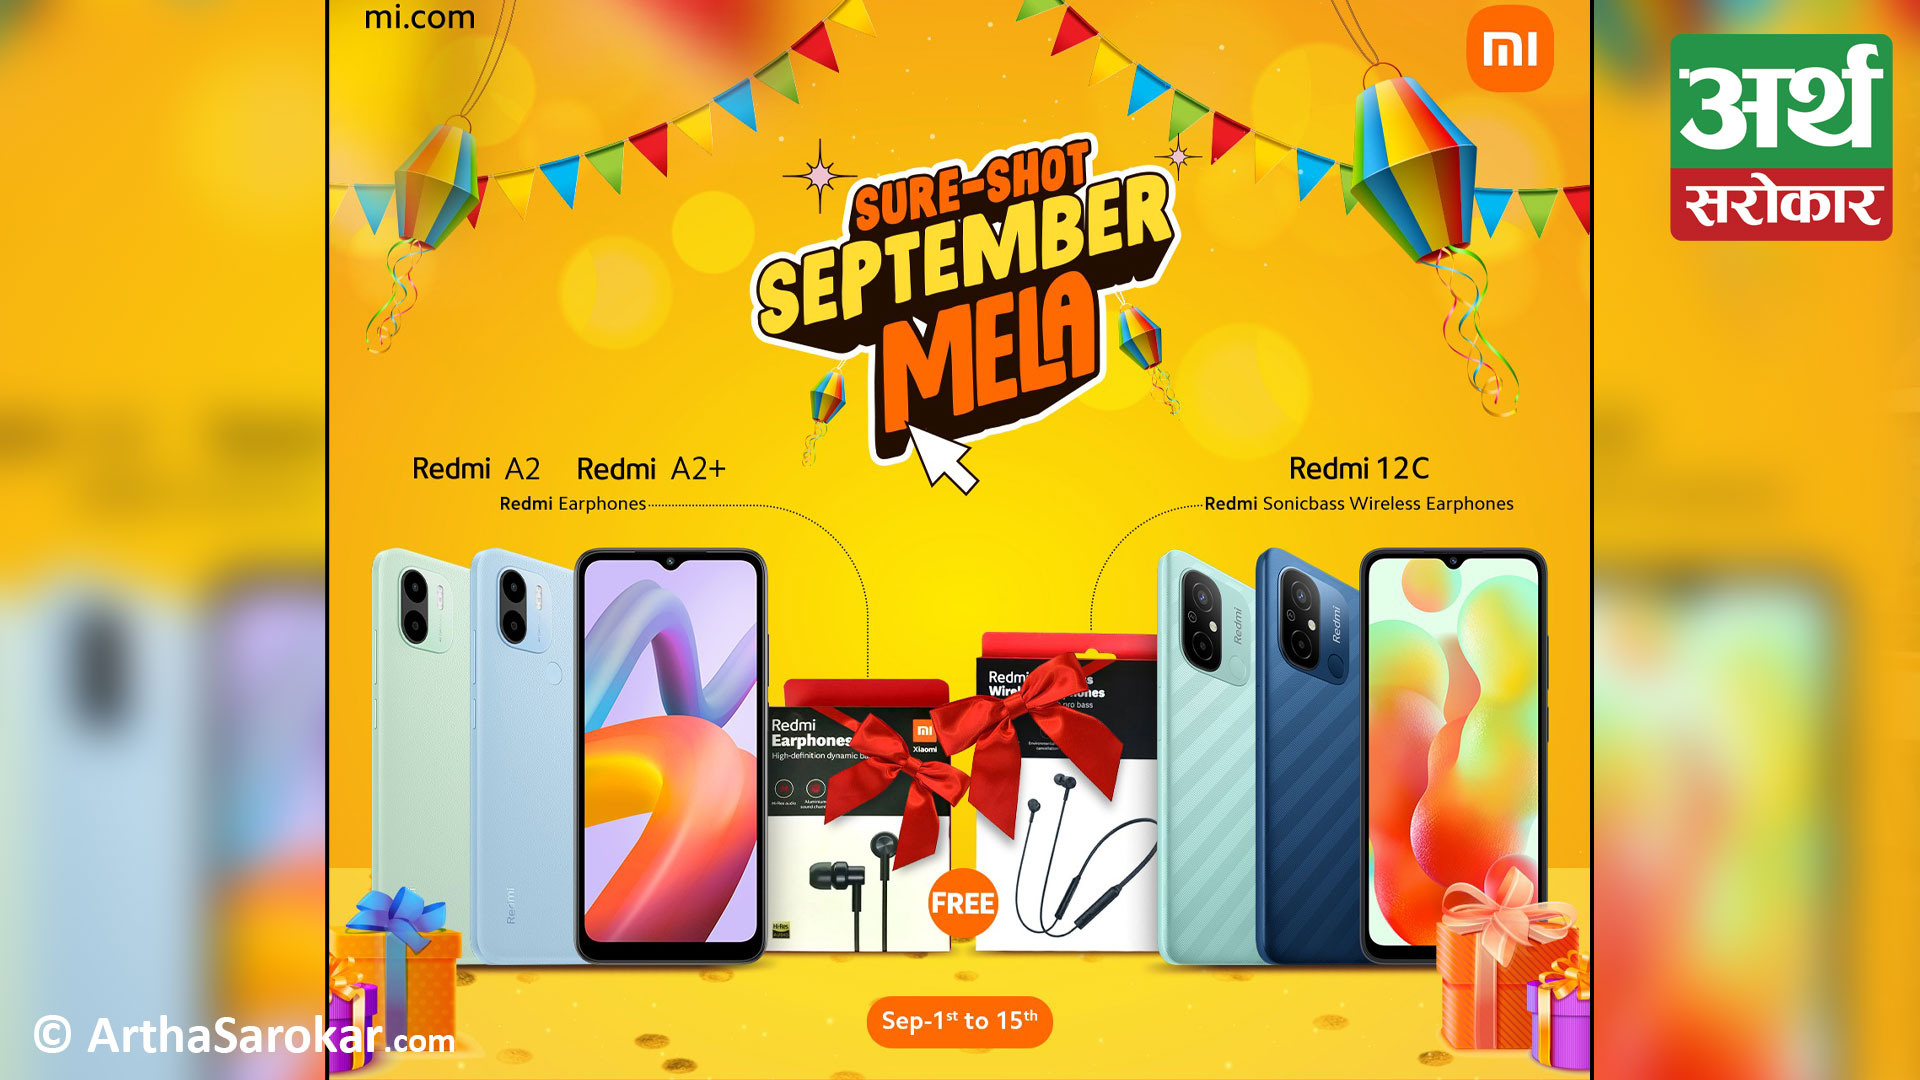 Xiaomi Brings Out ‘Sure-shot September Mela’ with Exciting Offers !